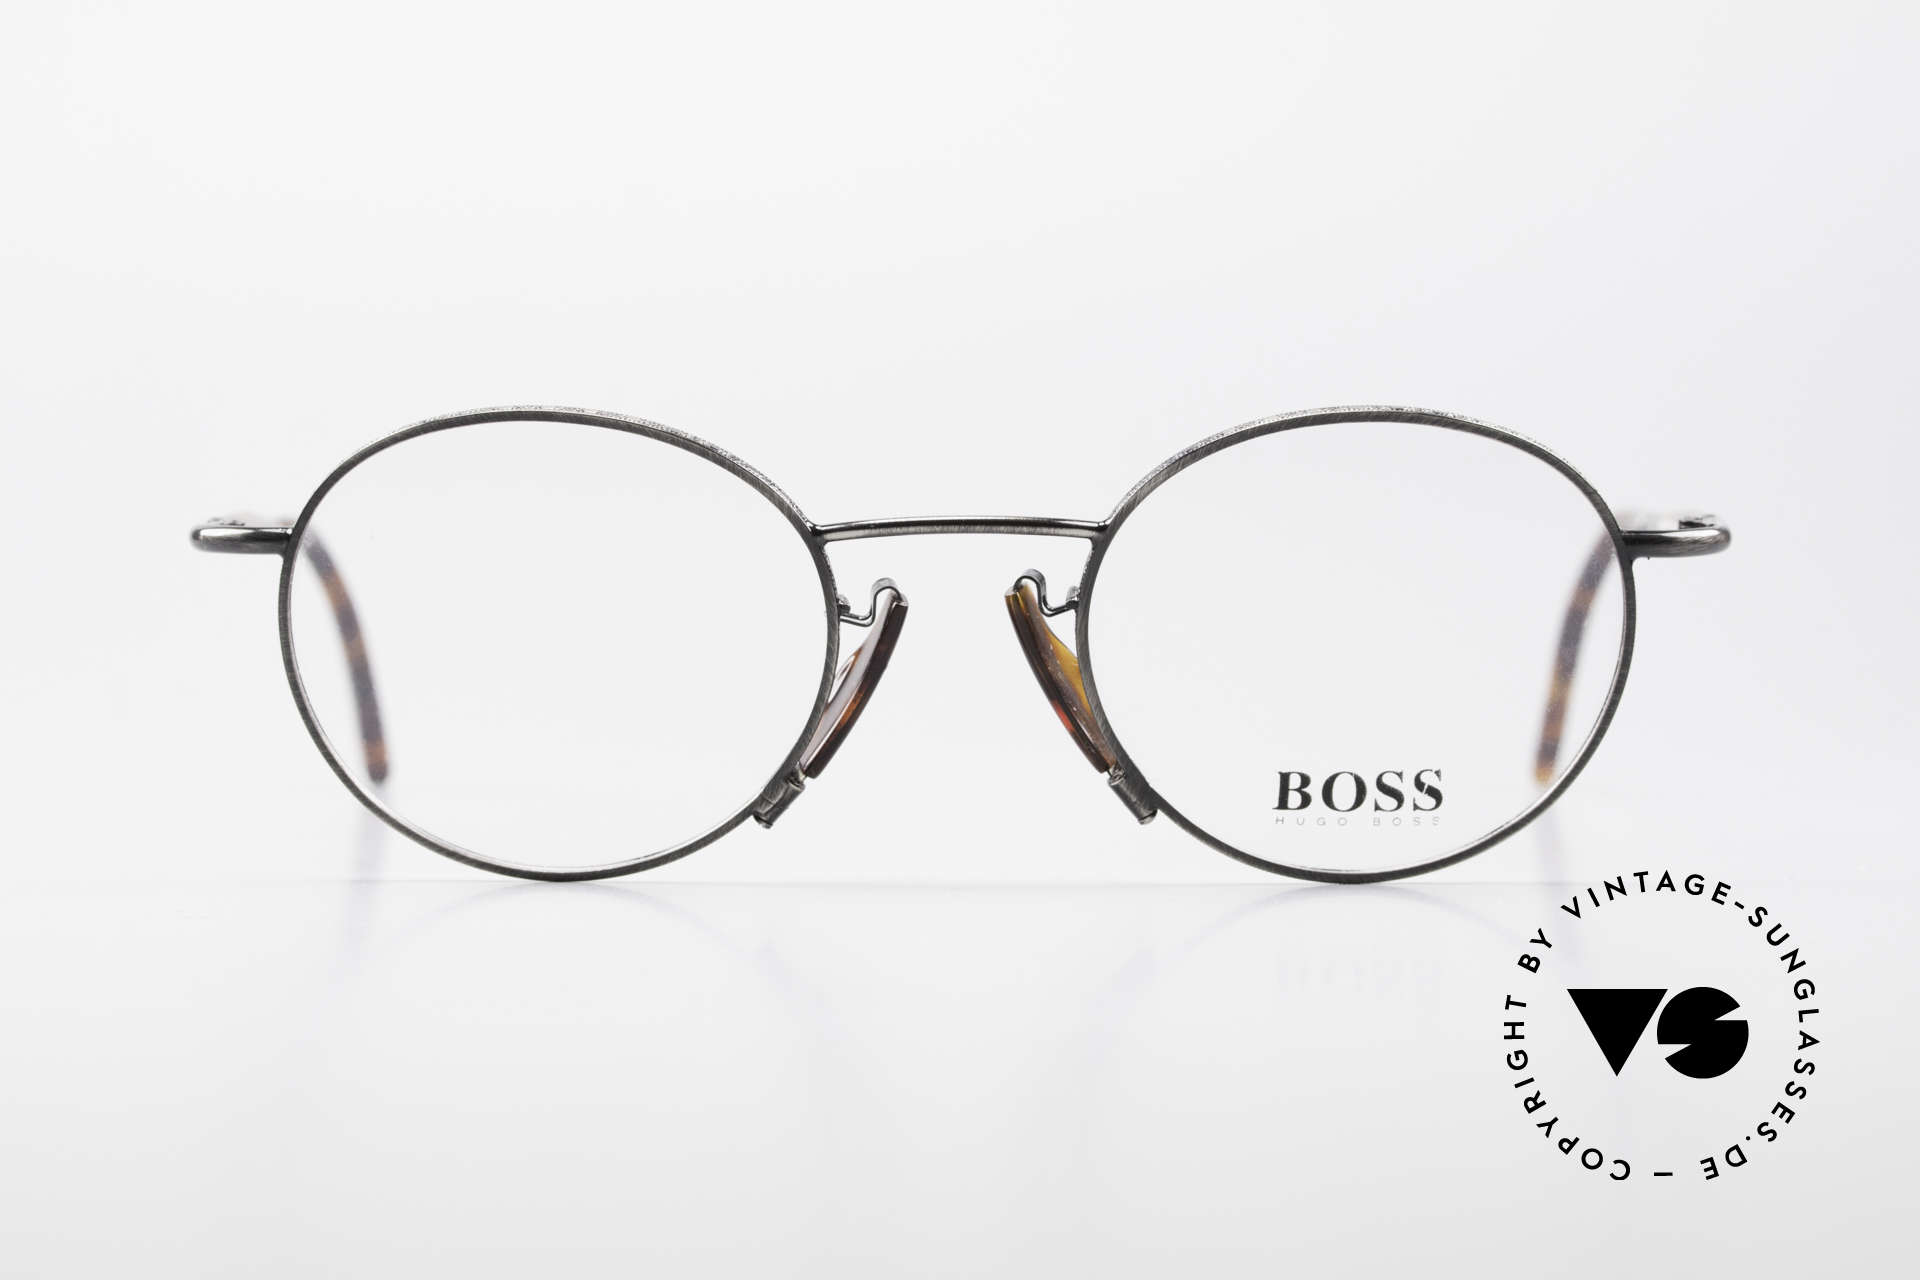 BOSS 4707 Round Panto Style Frame 90's, round vintage 'panto design' eyeglasses by BOSS, Made for Men